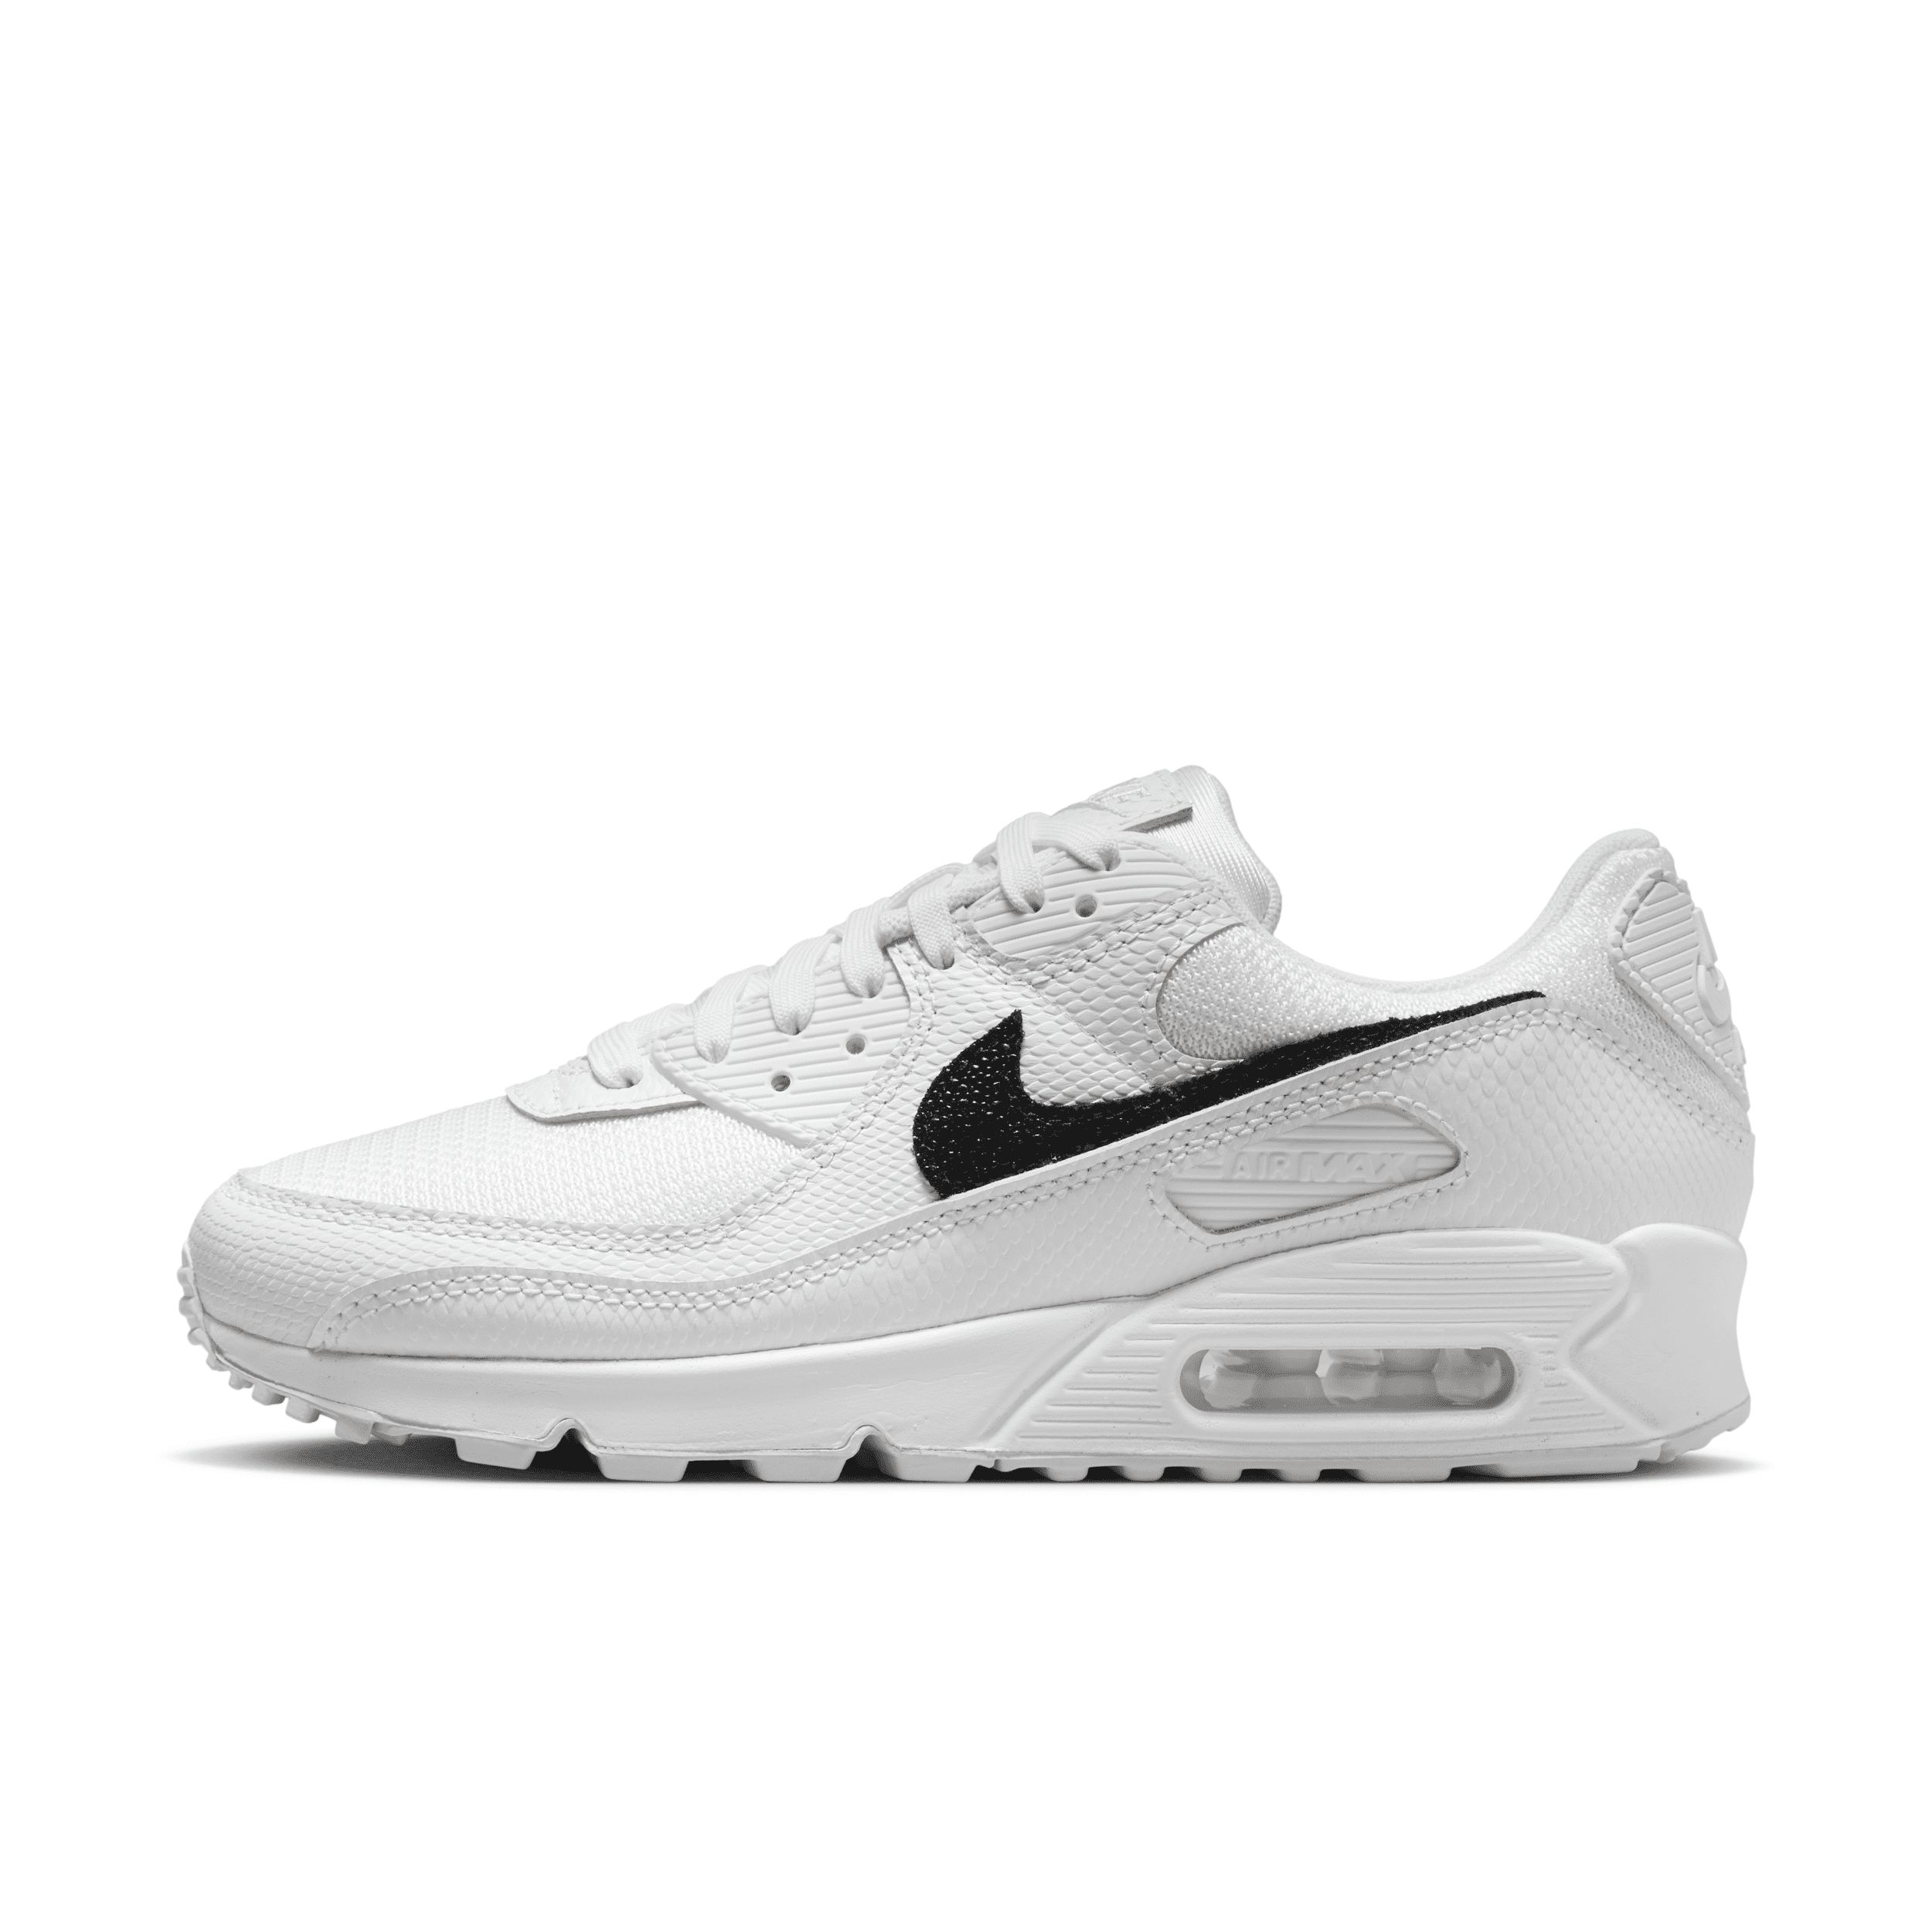 Nike Women's Air Max 90 Shoes in White, Size: 5.5 | DZ5212-100 | Nike (US)